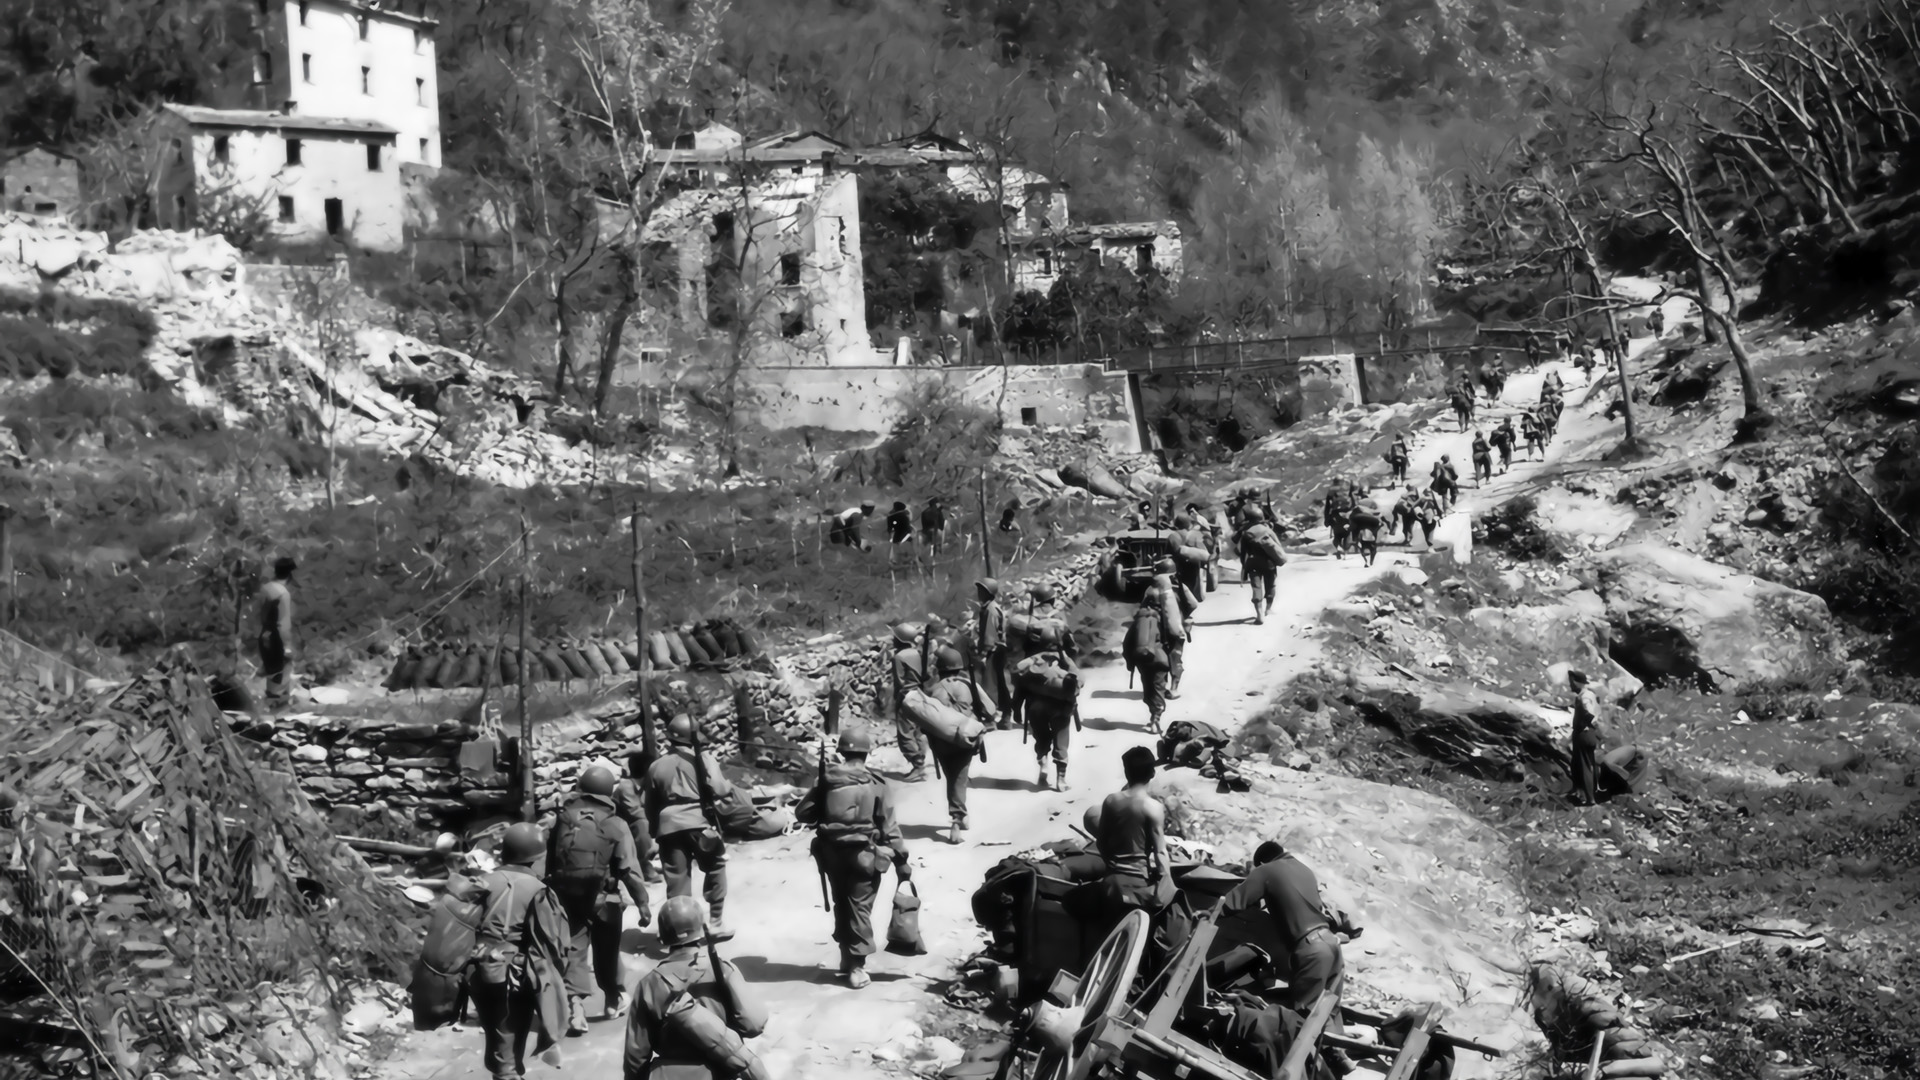 American soldiers of the 92nd Infantry Division move into the town of Moninoso, Italy, in April 1945. The 92nd was one of several Black outfits of the U.S. Army that served in the Italian campaign during World War II.